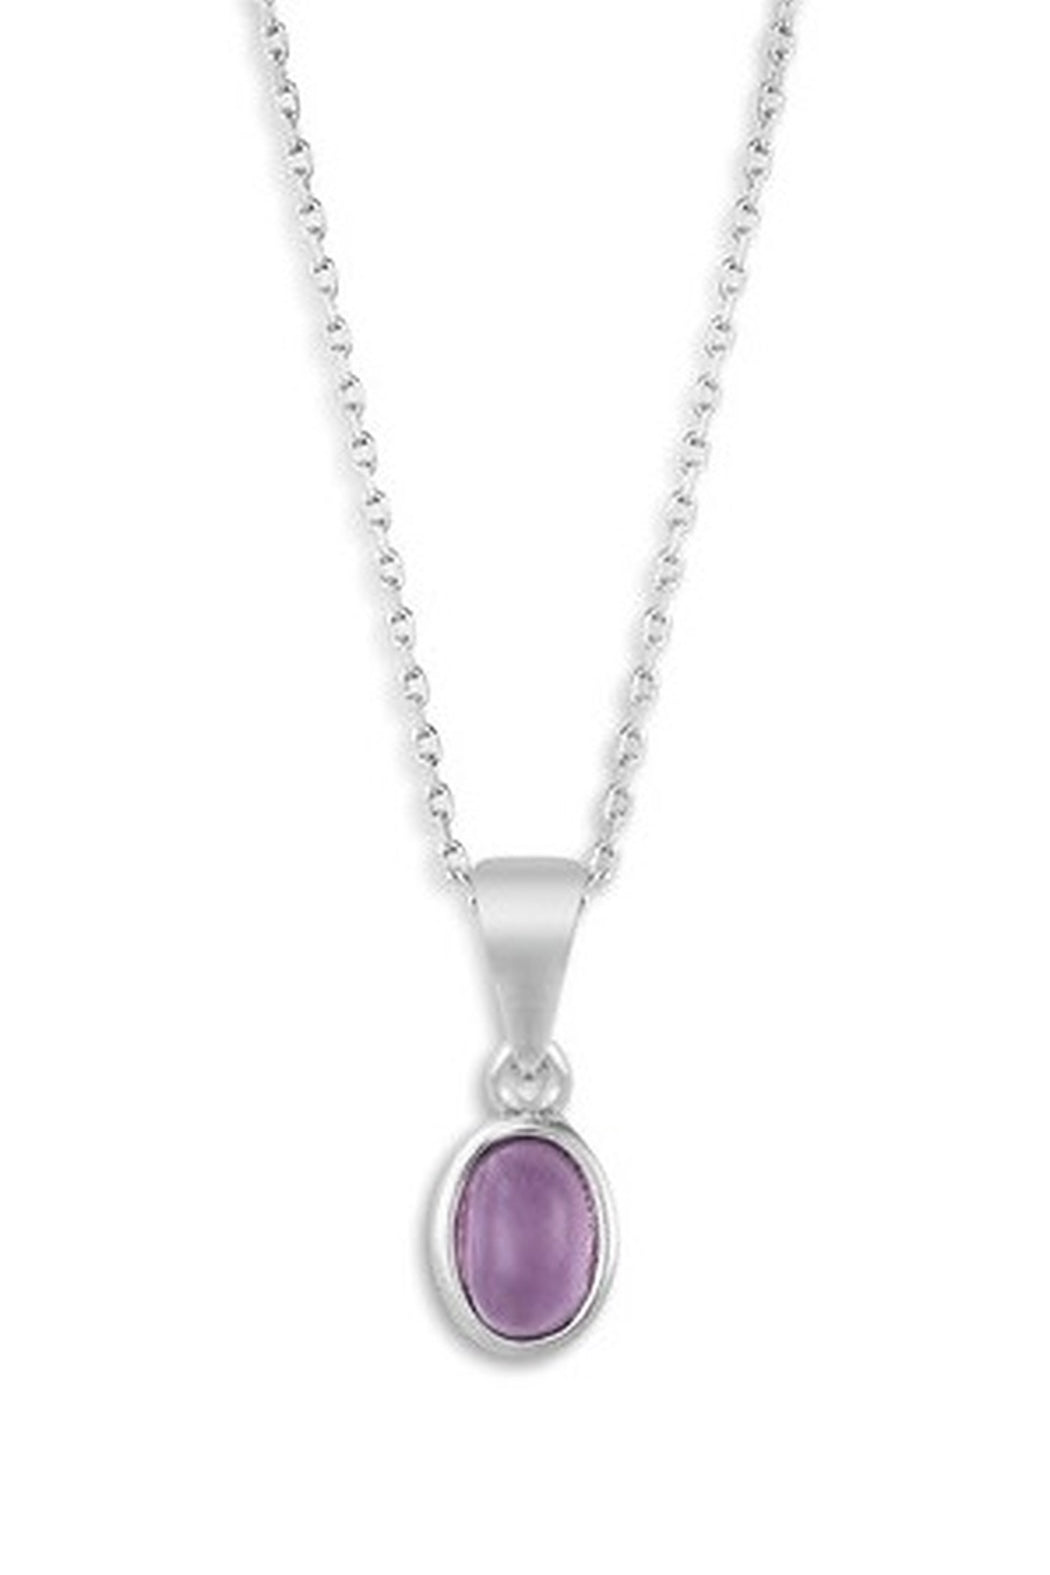 SILVER GIVING NECKLACE AMETHYST